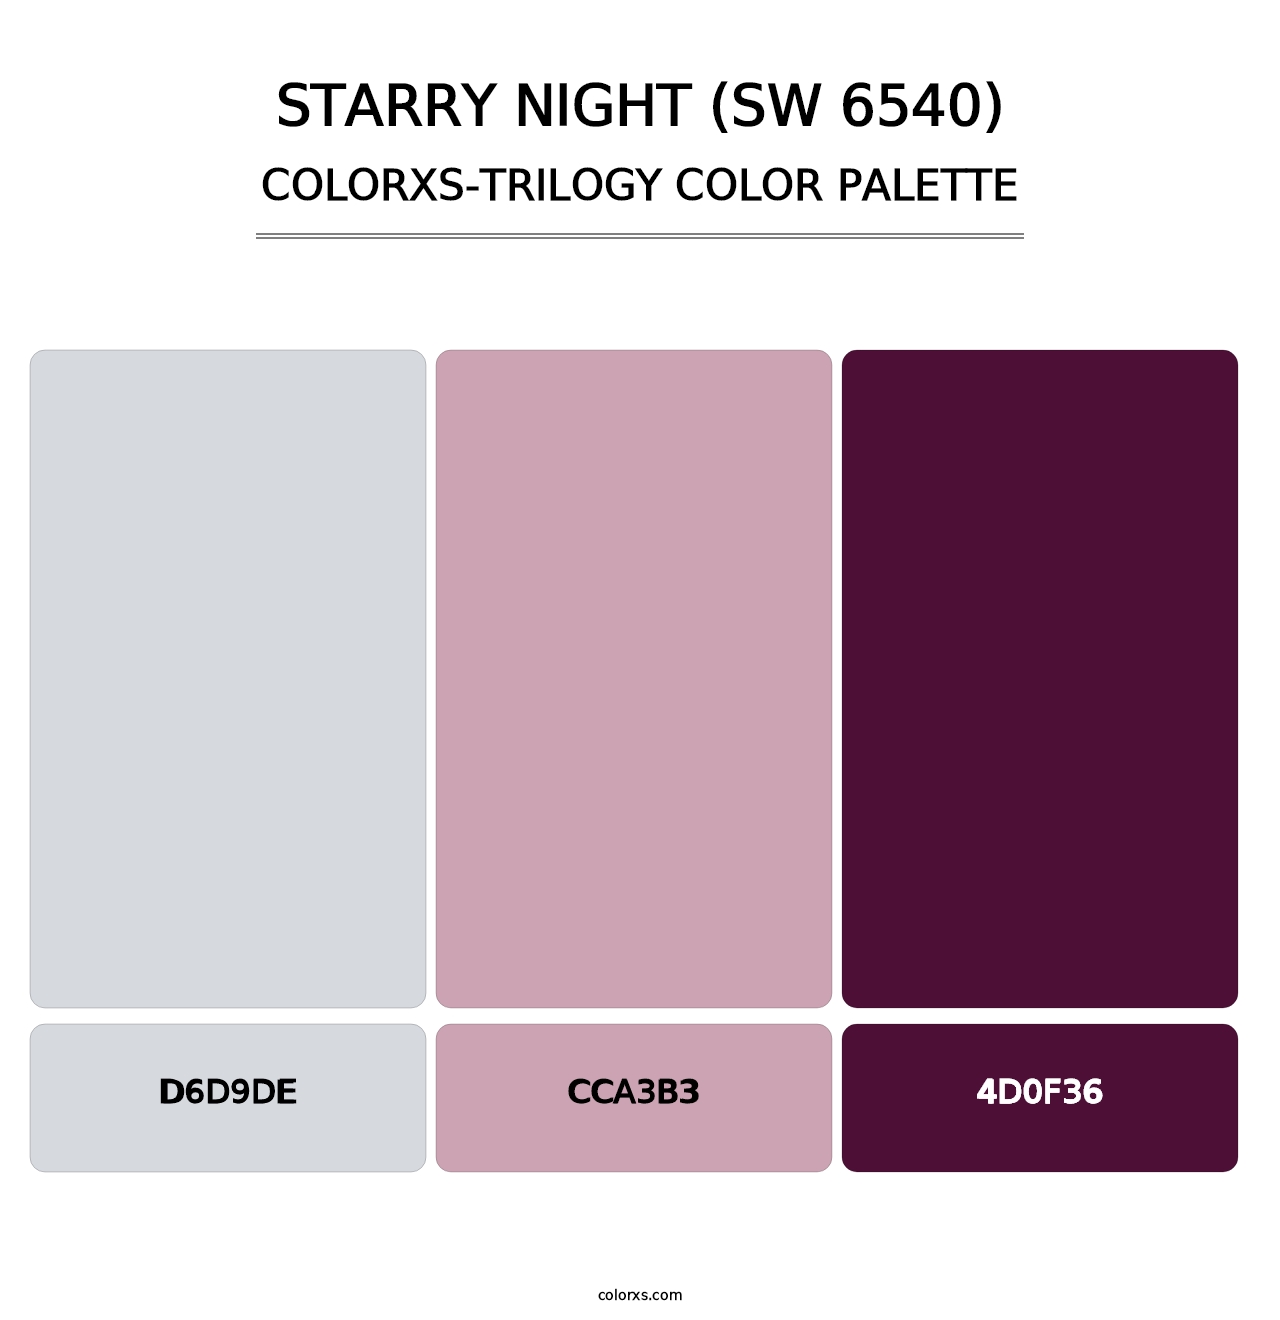 Starry Night (SW 6540) - Colorxs Trilogy Palette